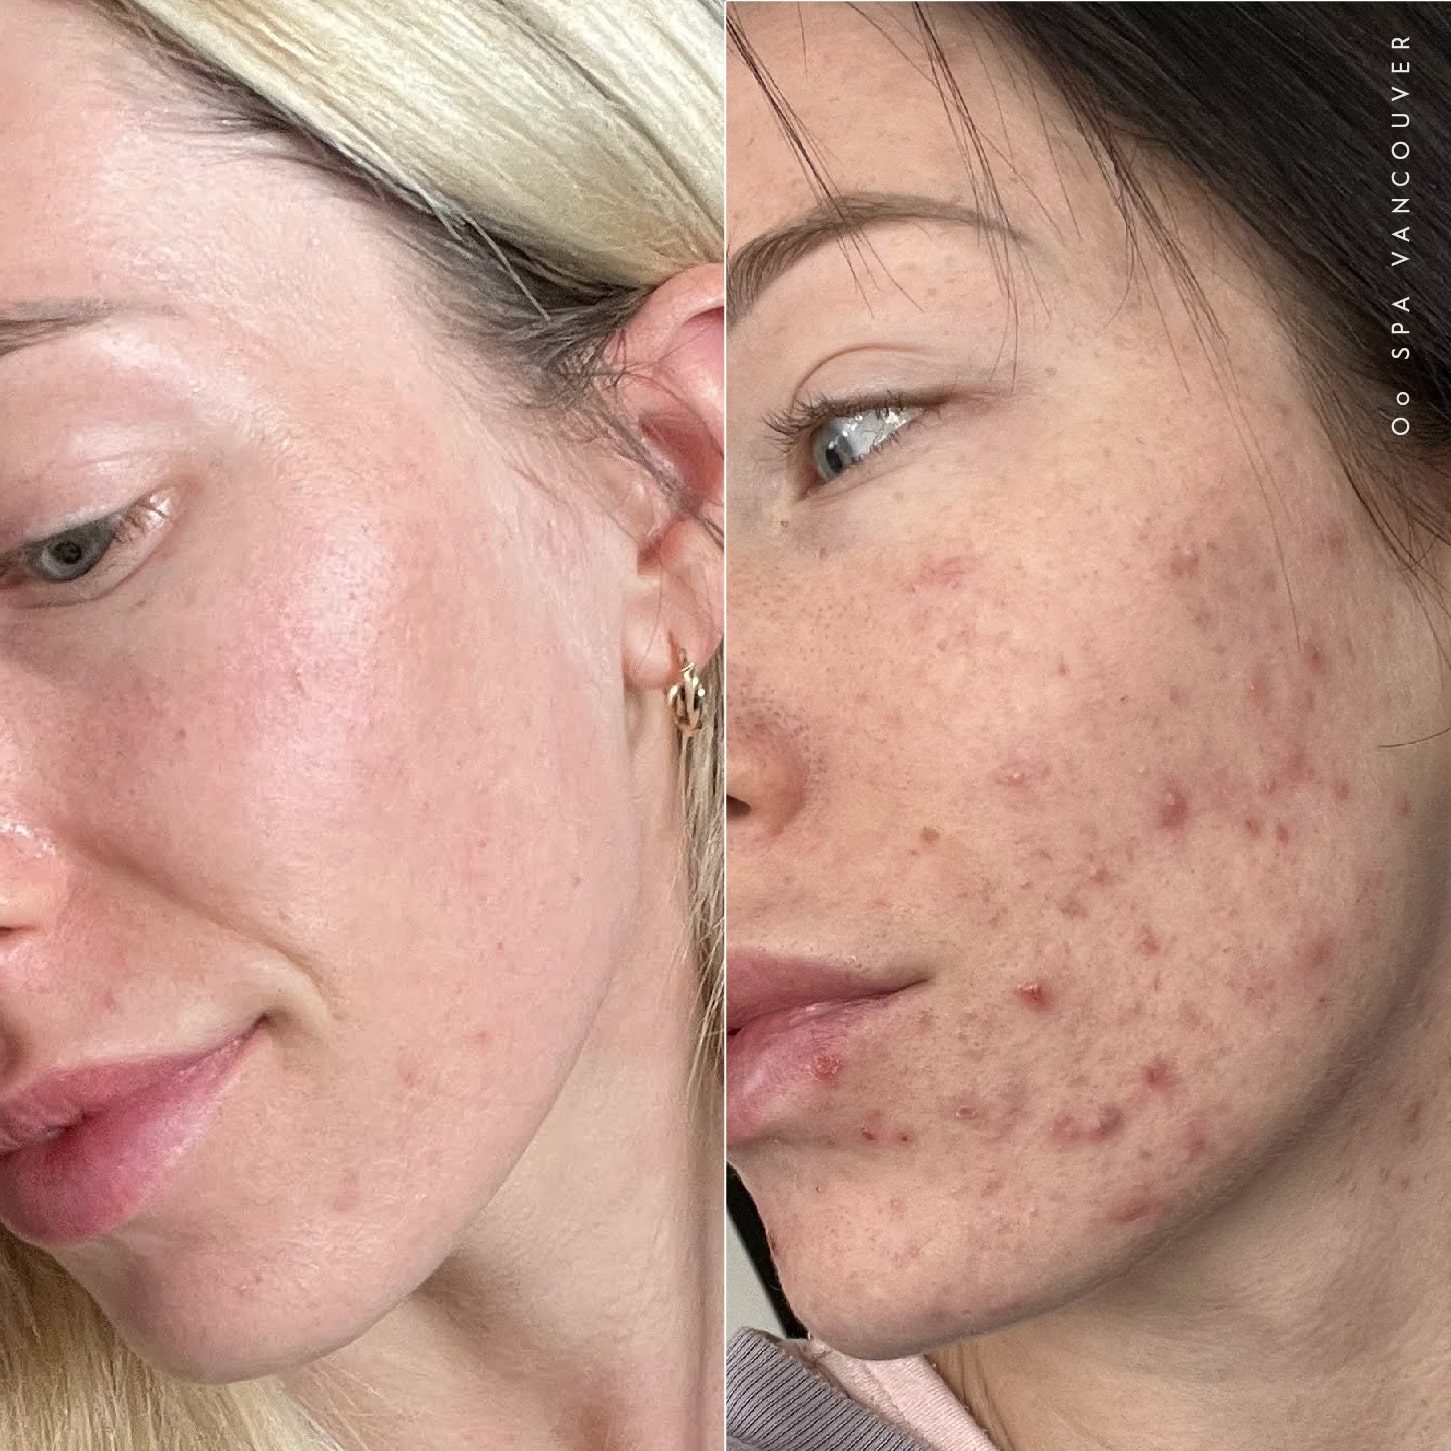 acne before after